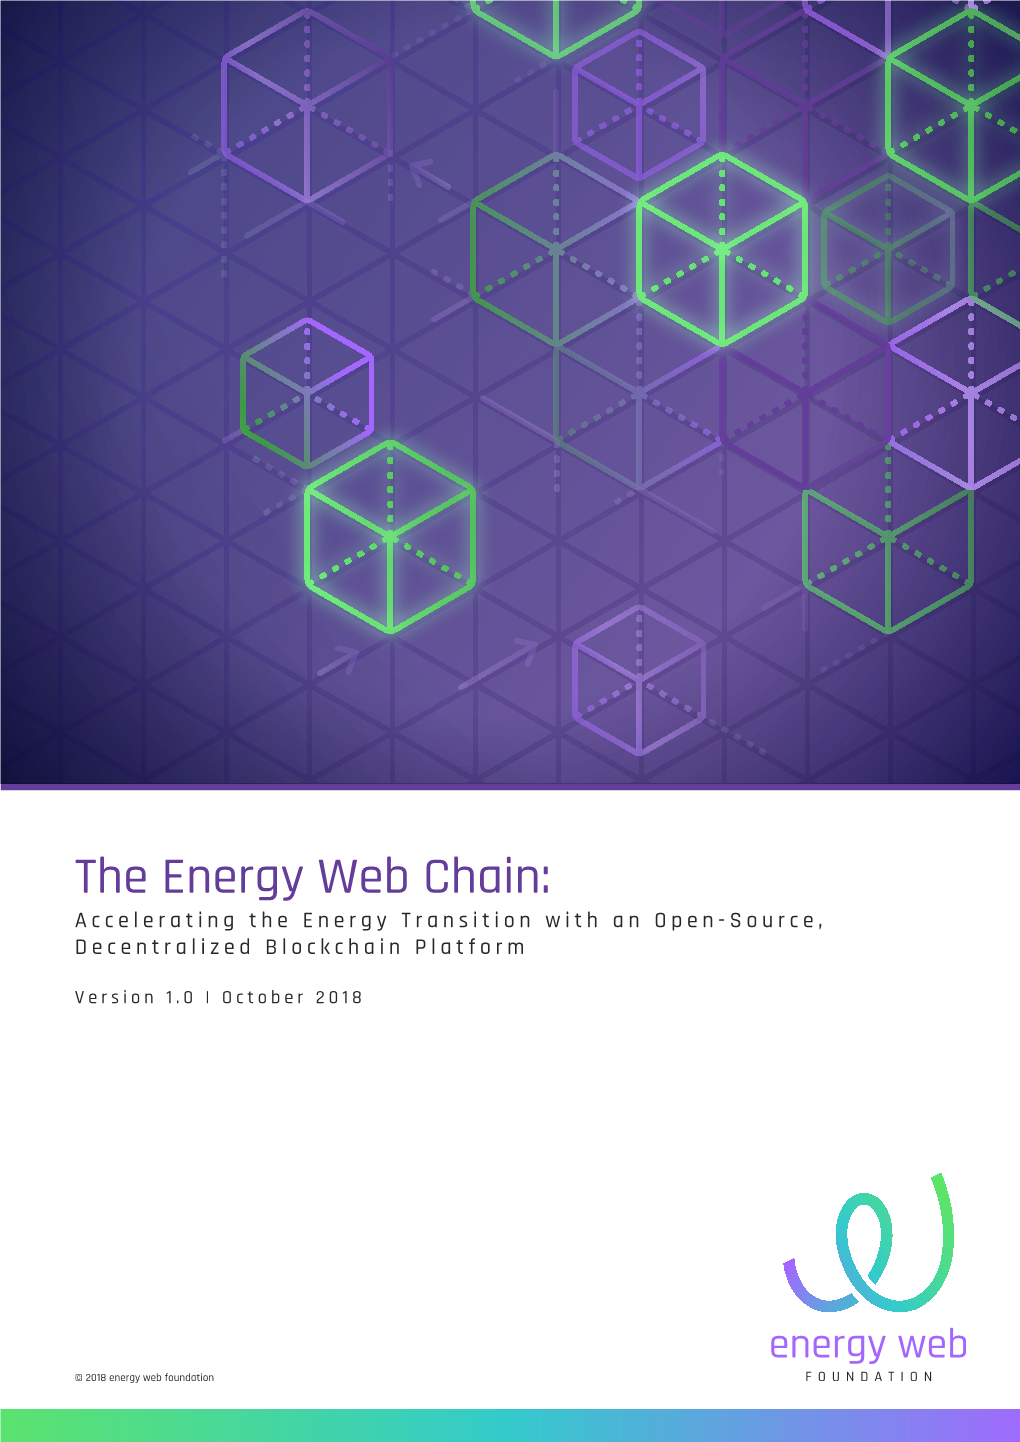 The Energy Web Chain: Accelerating the Energy Transition with an Open-Source, Decentralized Blockchain Platform